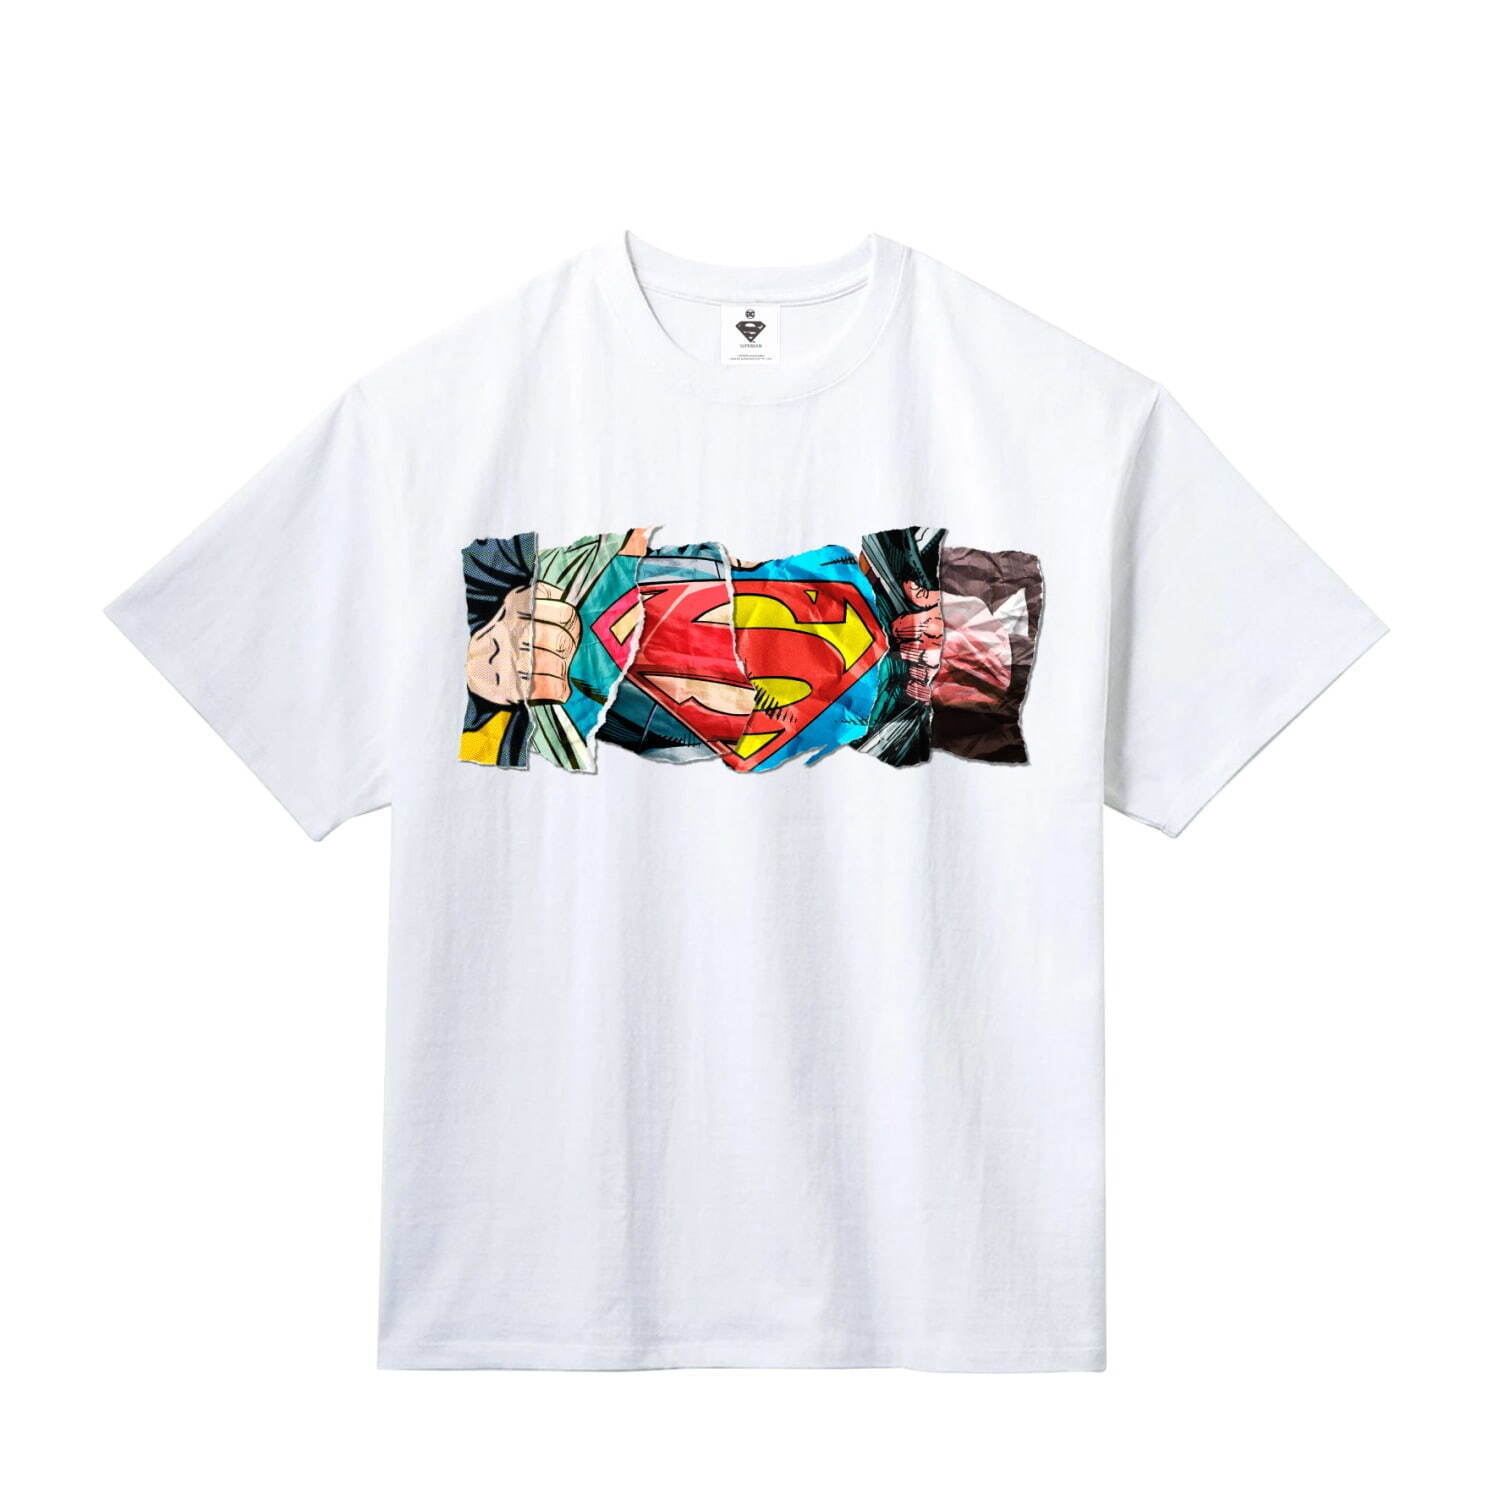 Tシャツ 各4,500円
DC SUPER HEROES and all related characters and elements © & ™ DC Comics. WB SHIELD: © & ™ WBEI.